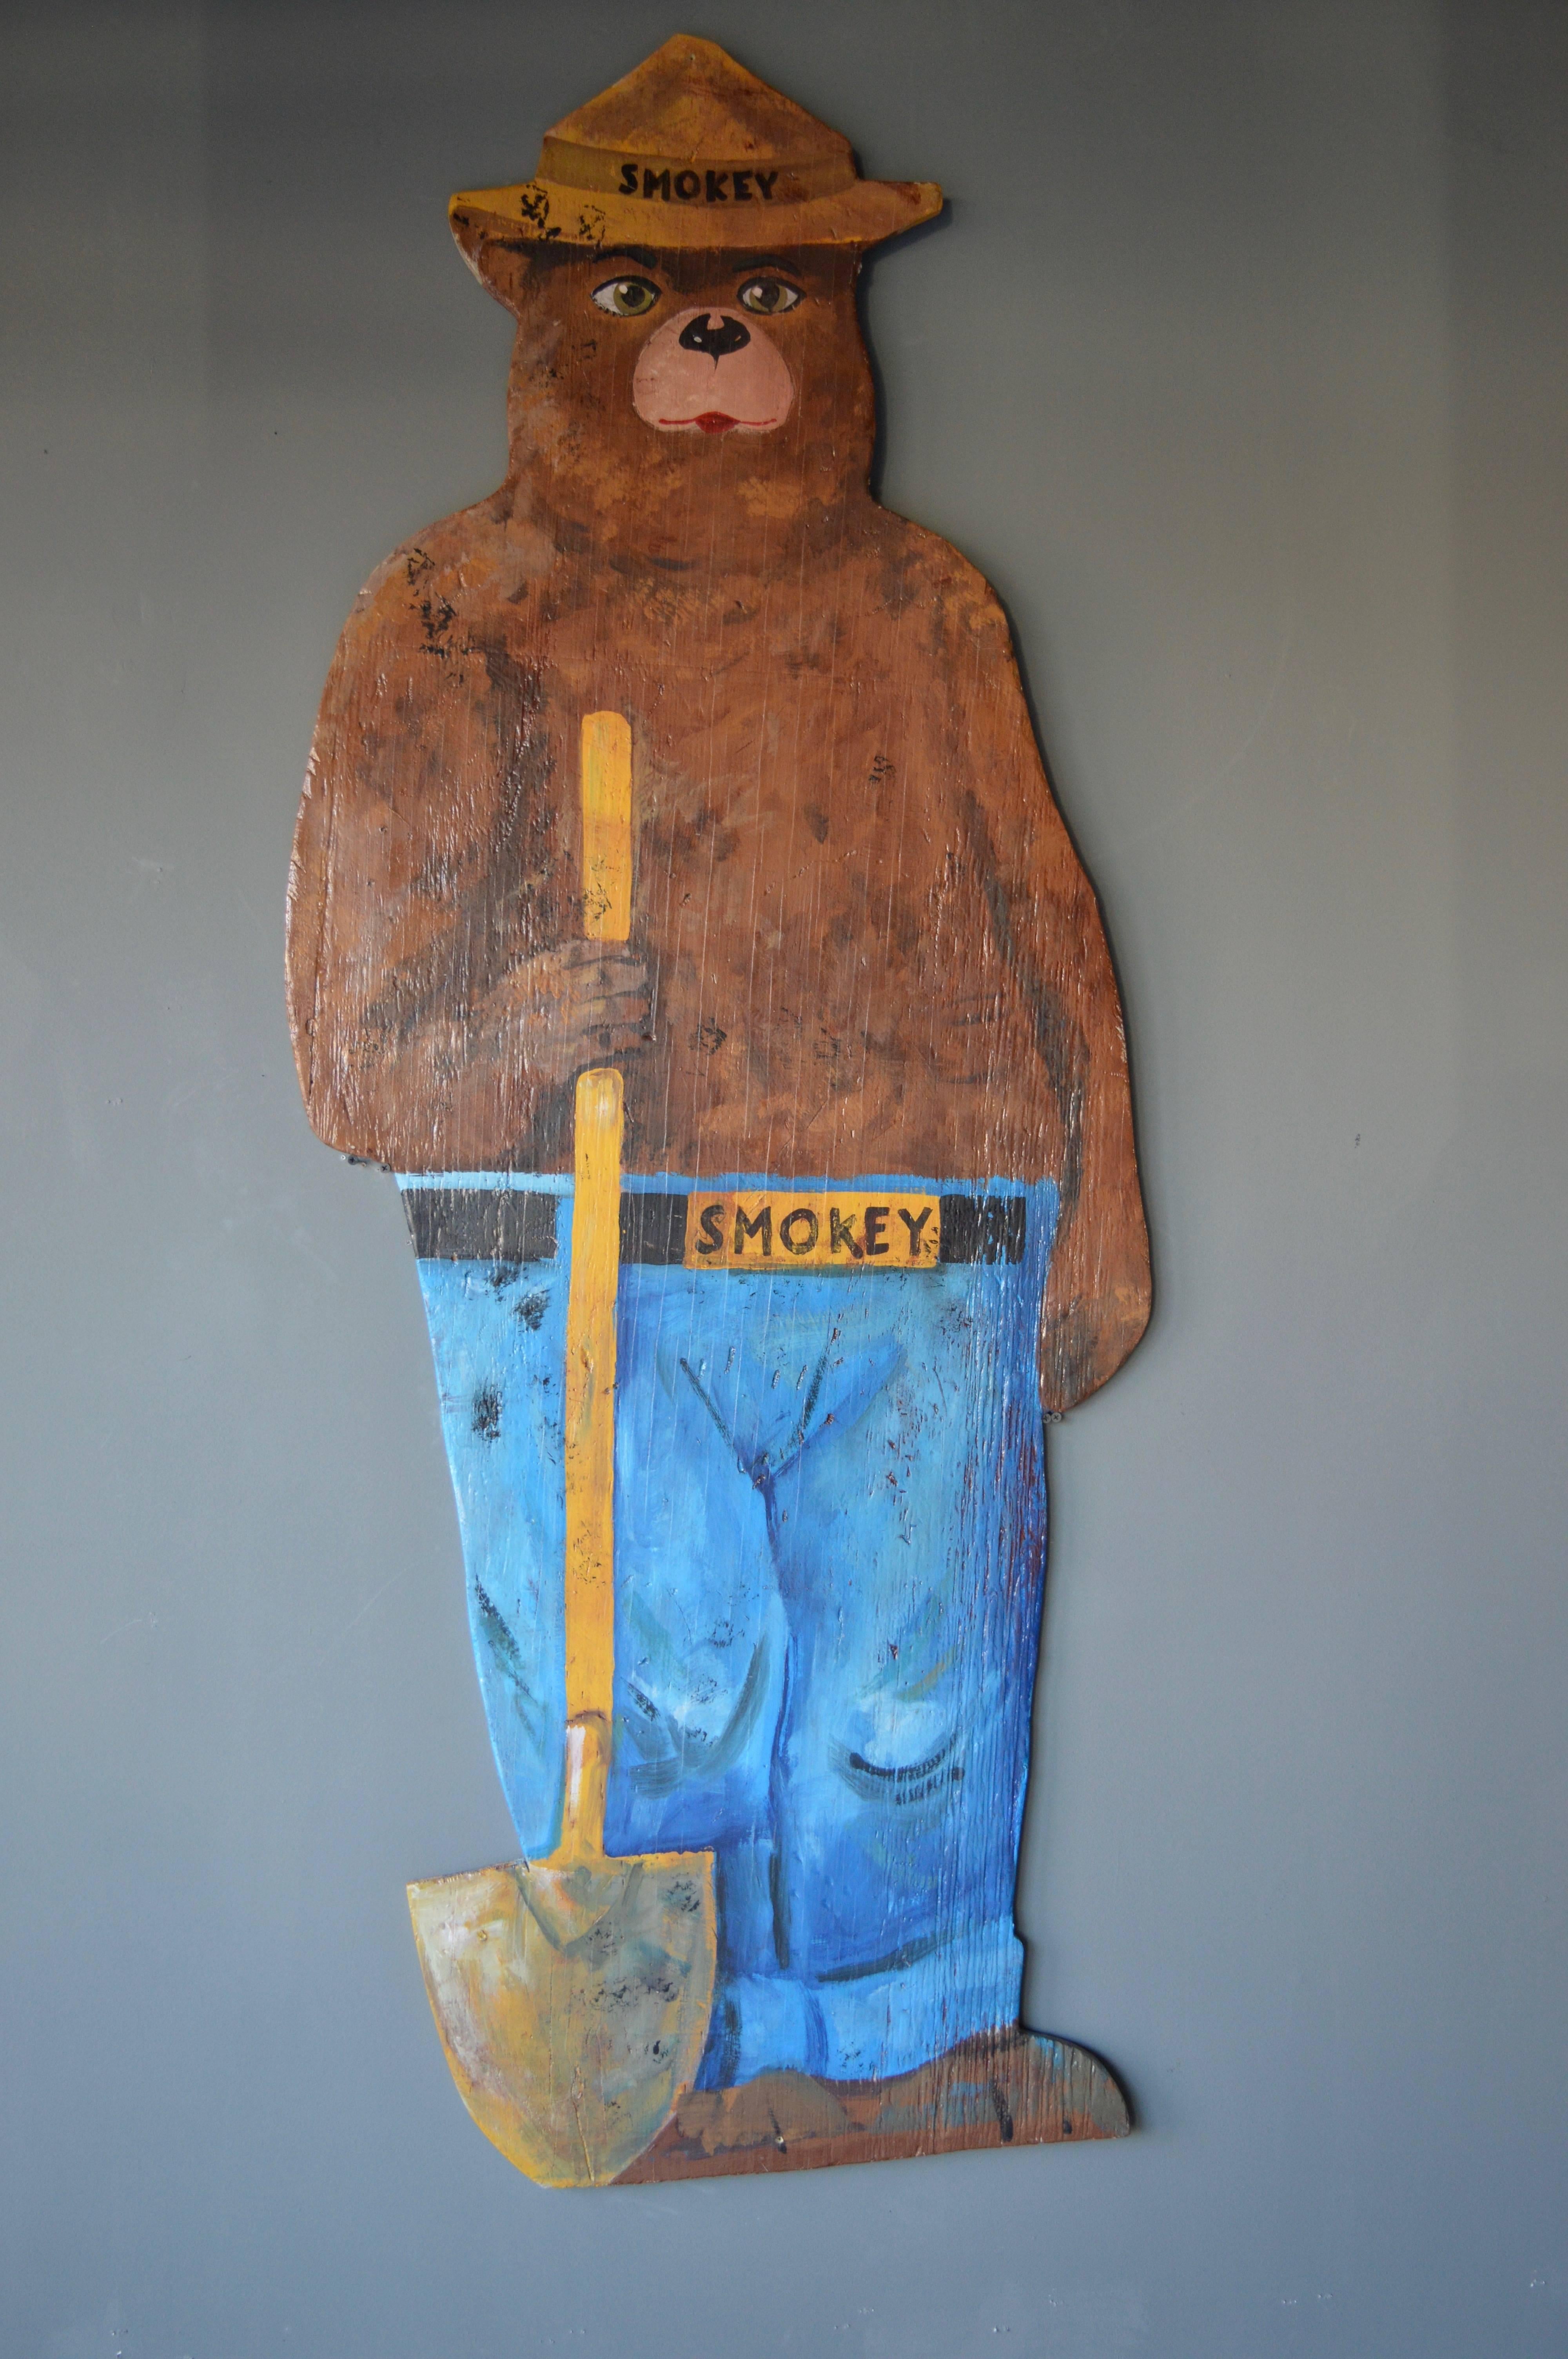 6 foot tall Smokey the Bear. Hand-painted wooden sign from the United States Parks and Wildlife. Great piece of Americana. Very rare. Excellent vintage condition and great coloring.